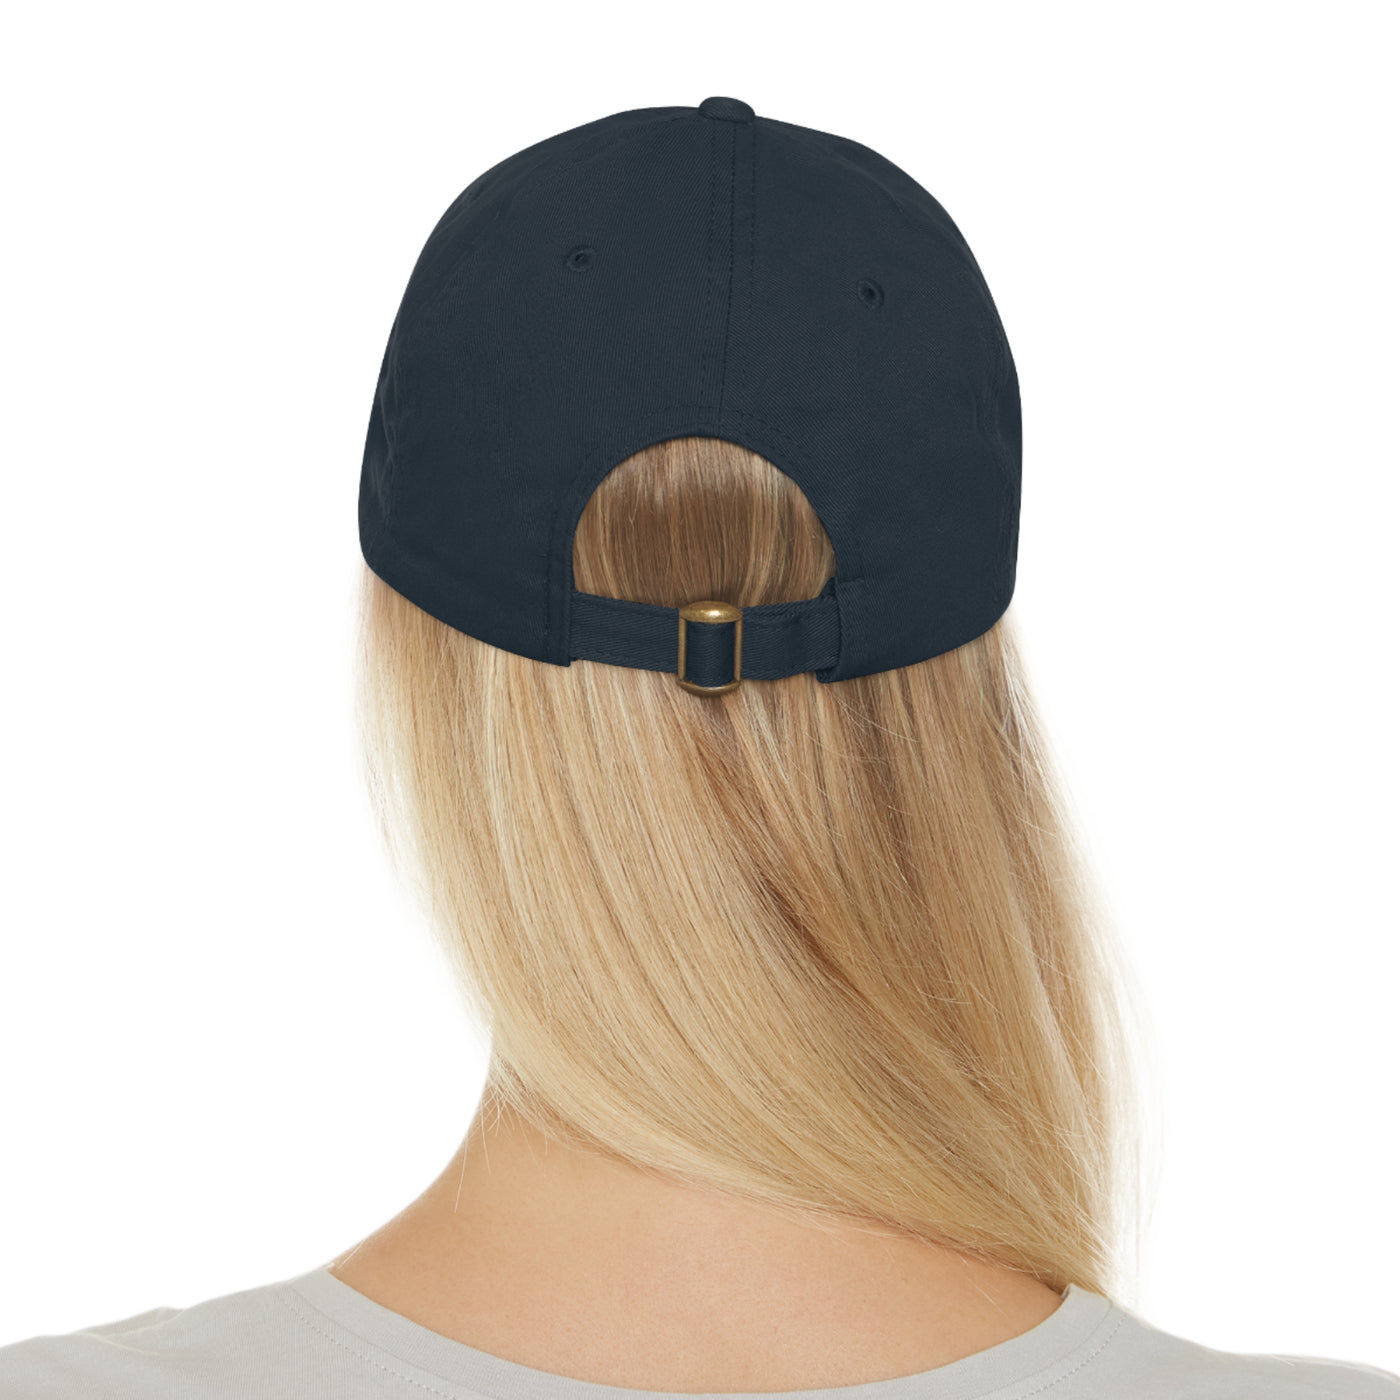 BOWLING THERAPY cap with Leather Patch